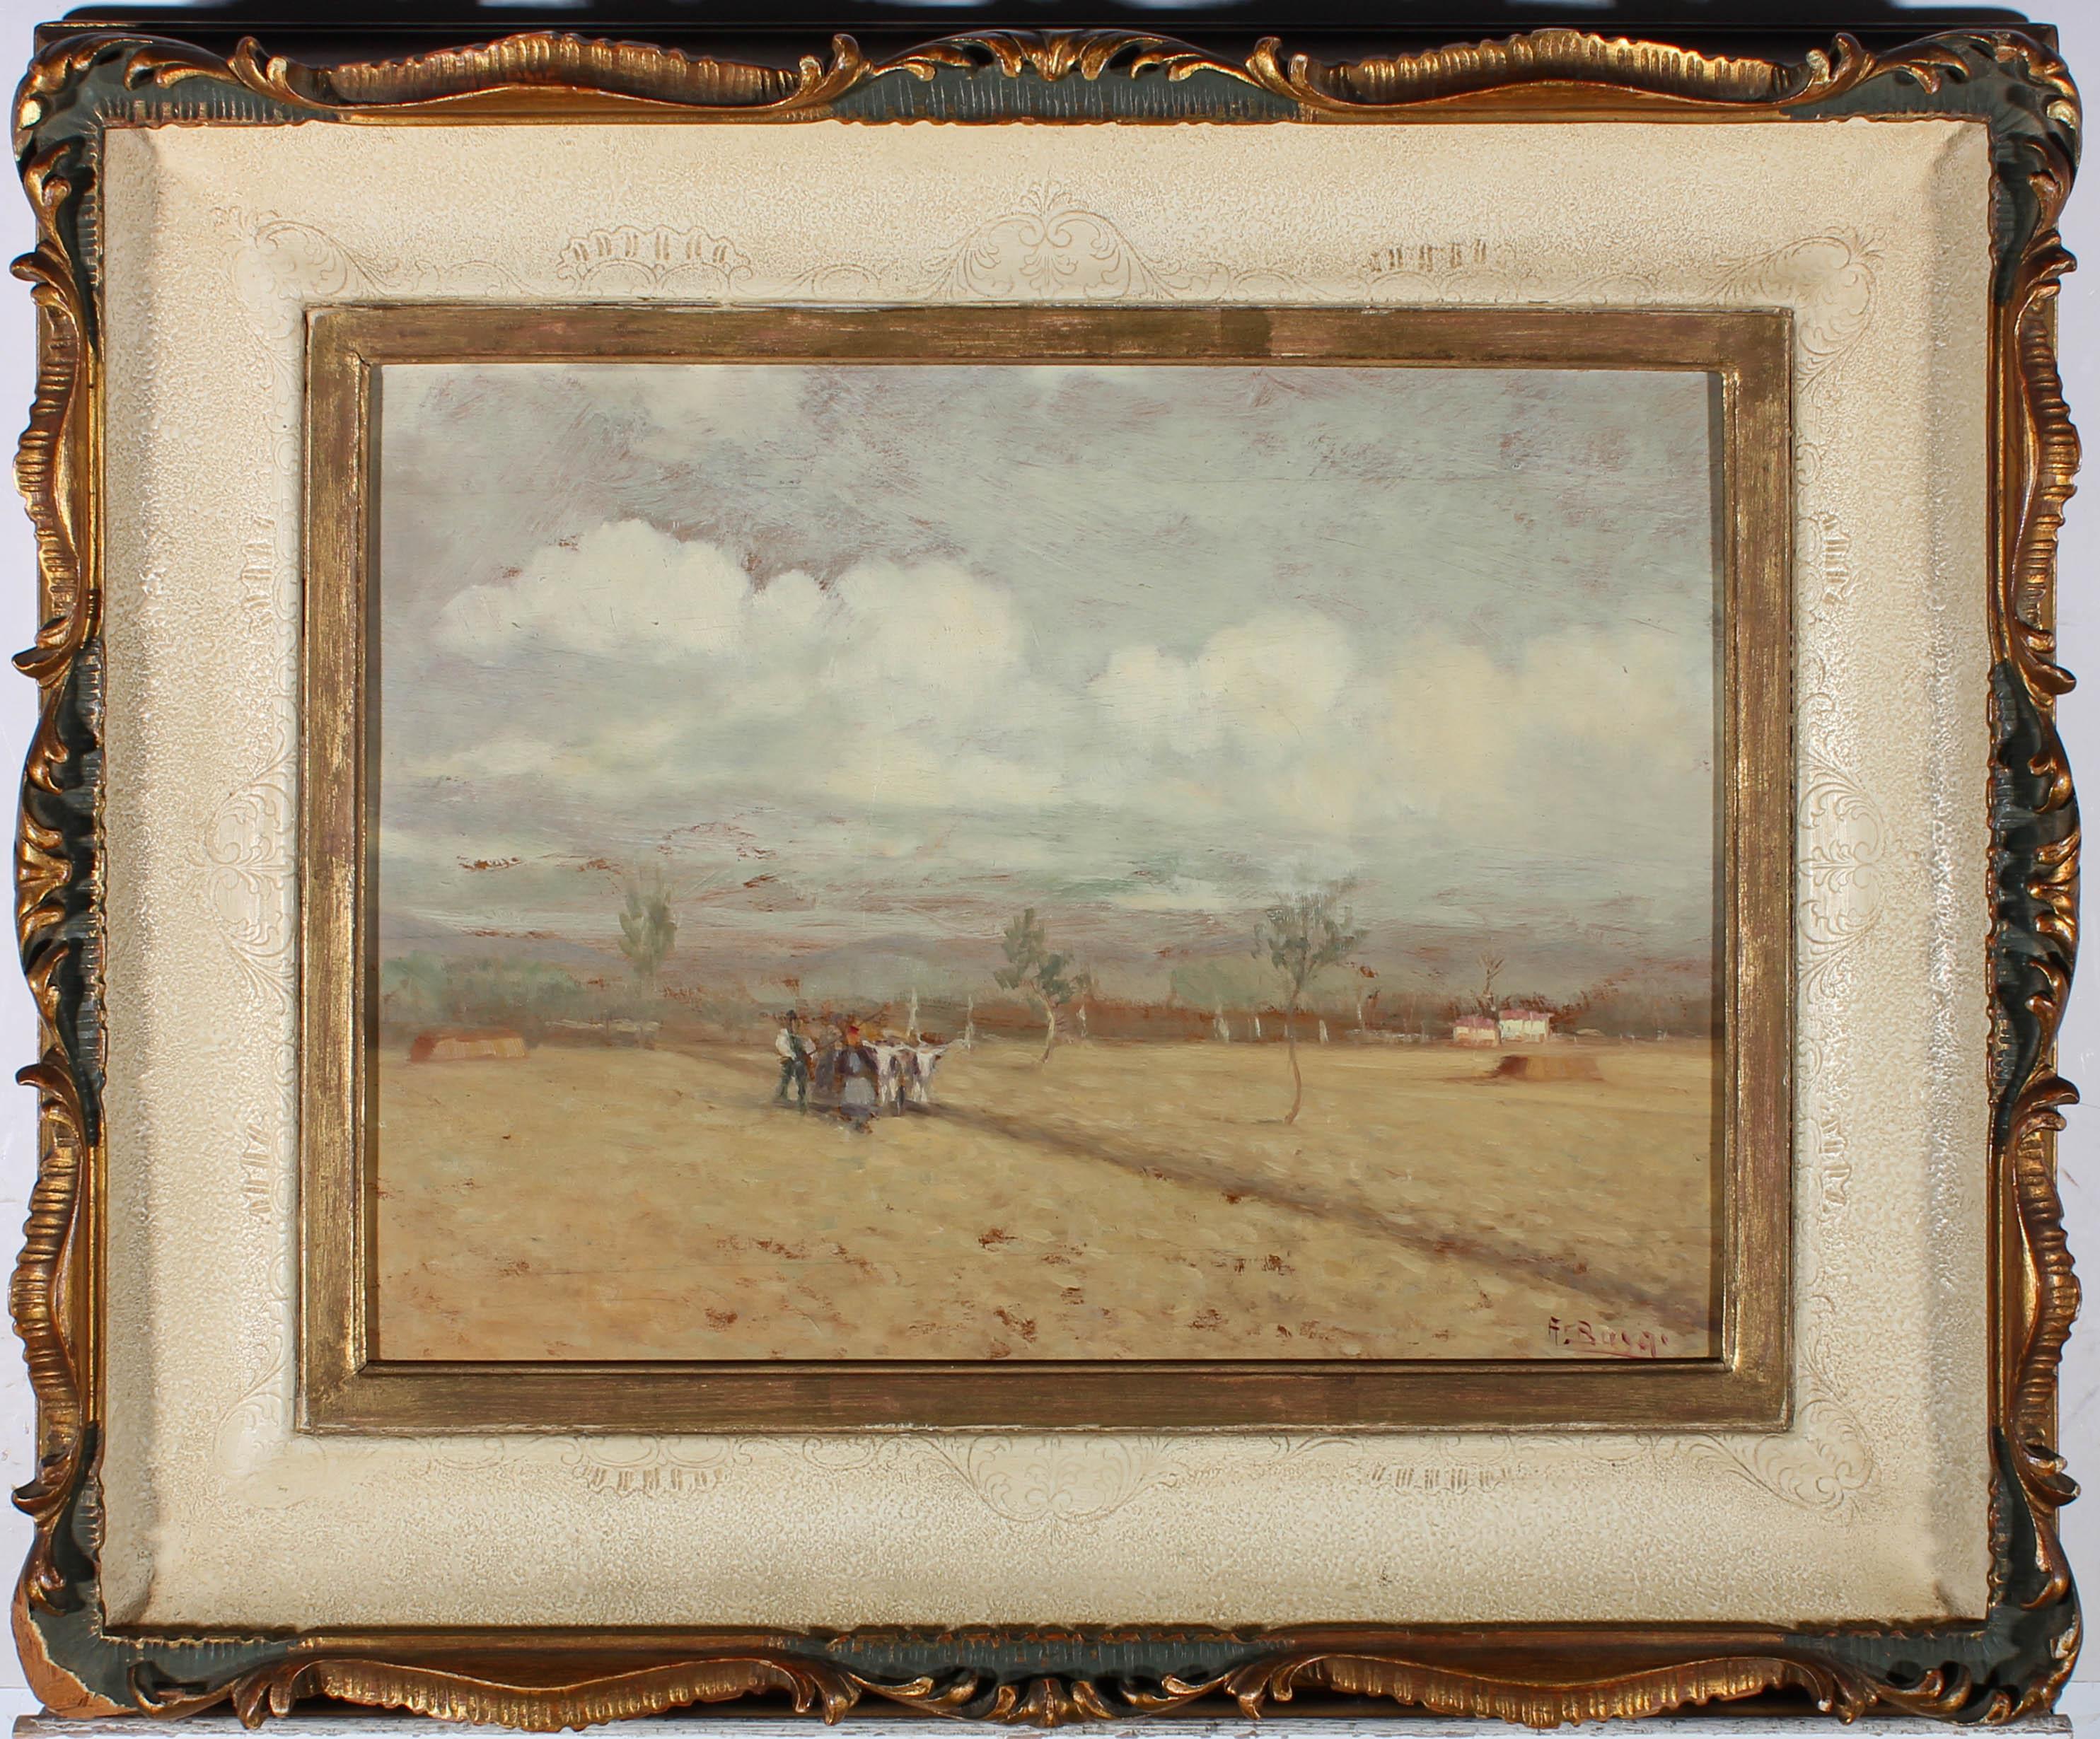 Unknown Landscape Painting - 20th Century Oil - Tilling The Field